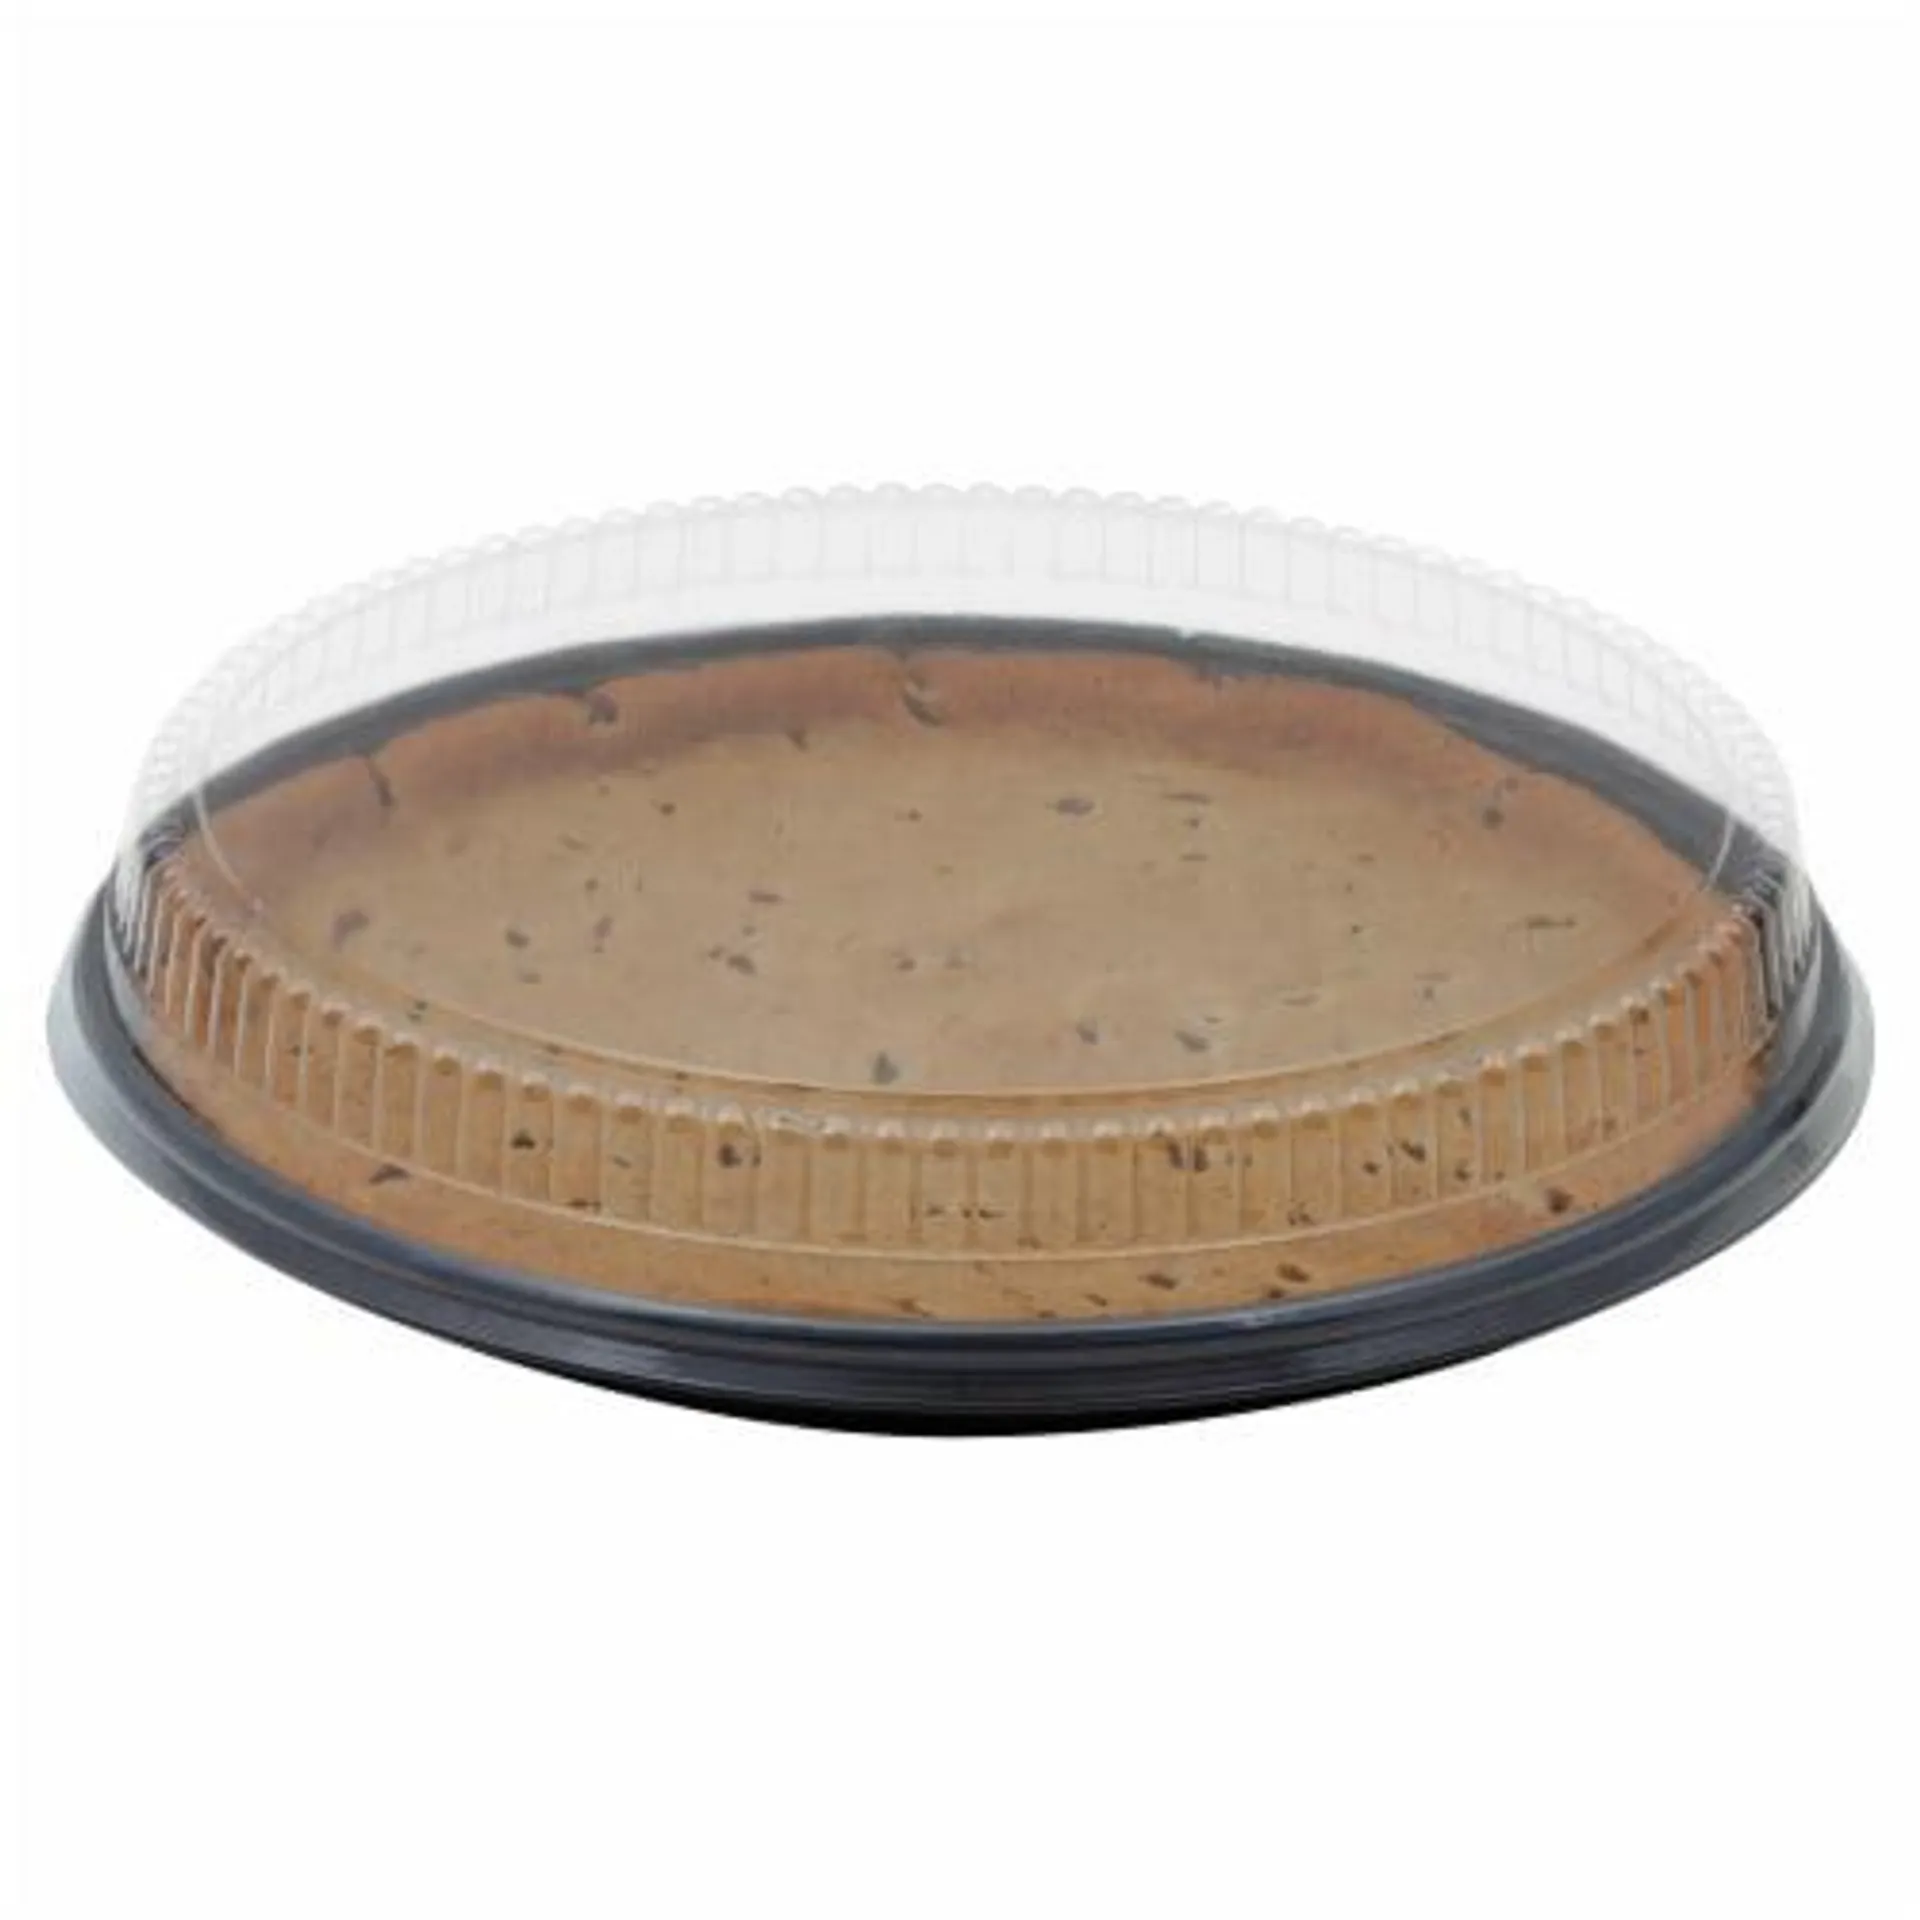 Fresh Foods Market Undecorated Cookie Cake